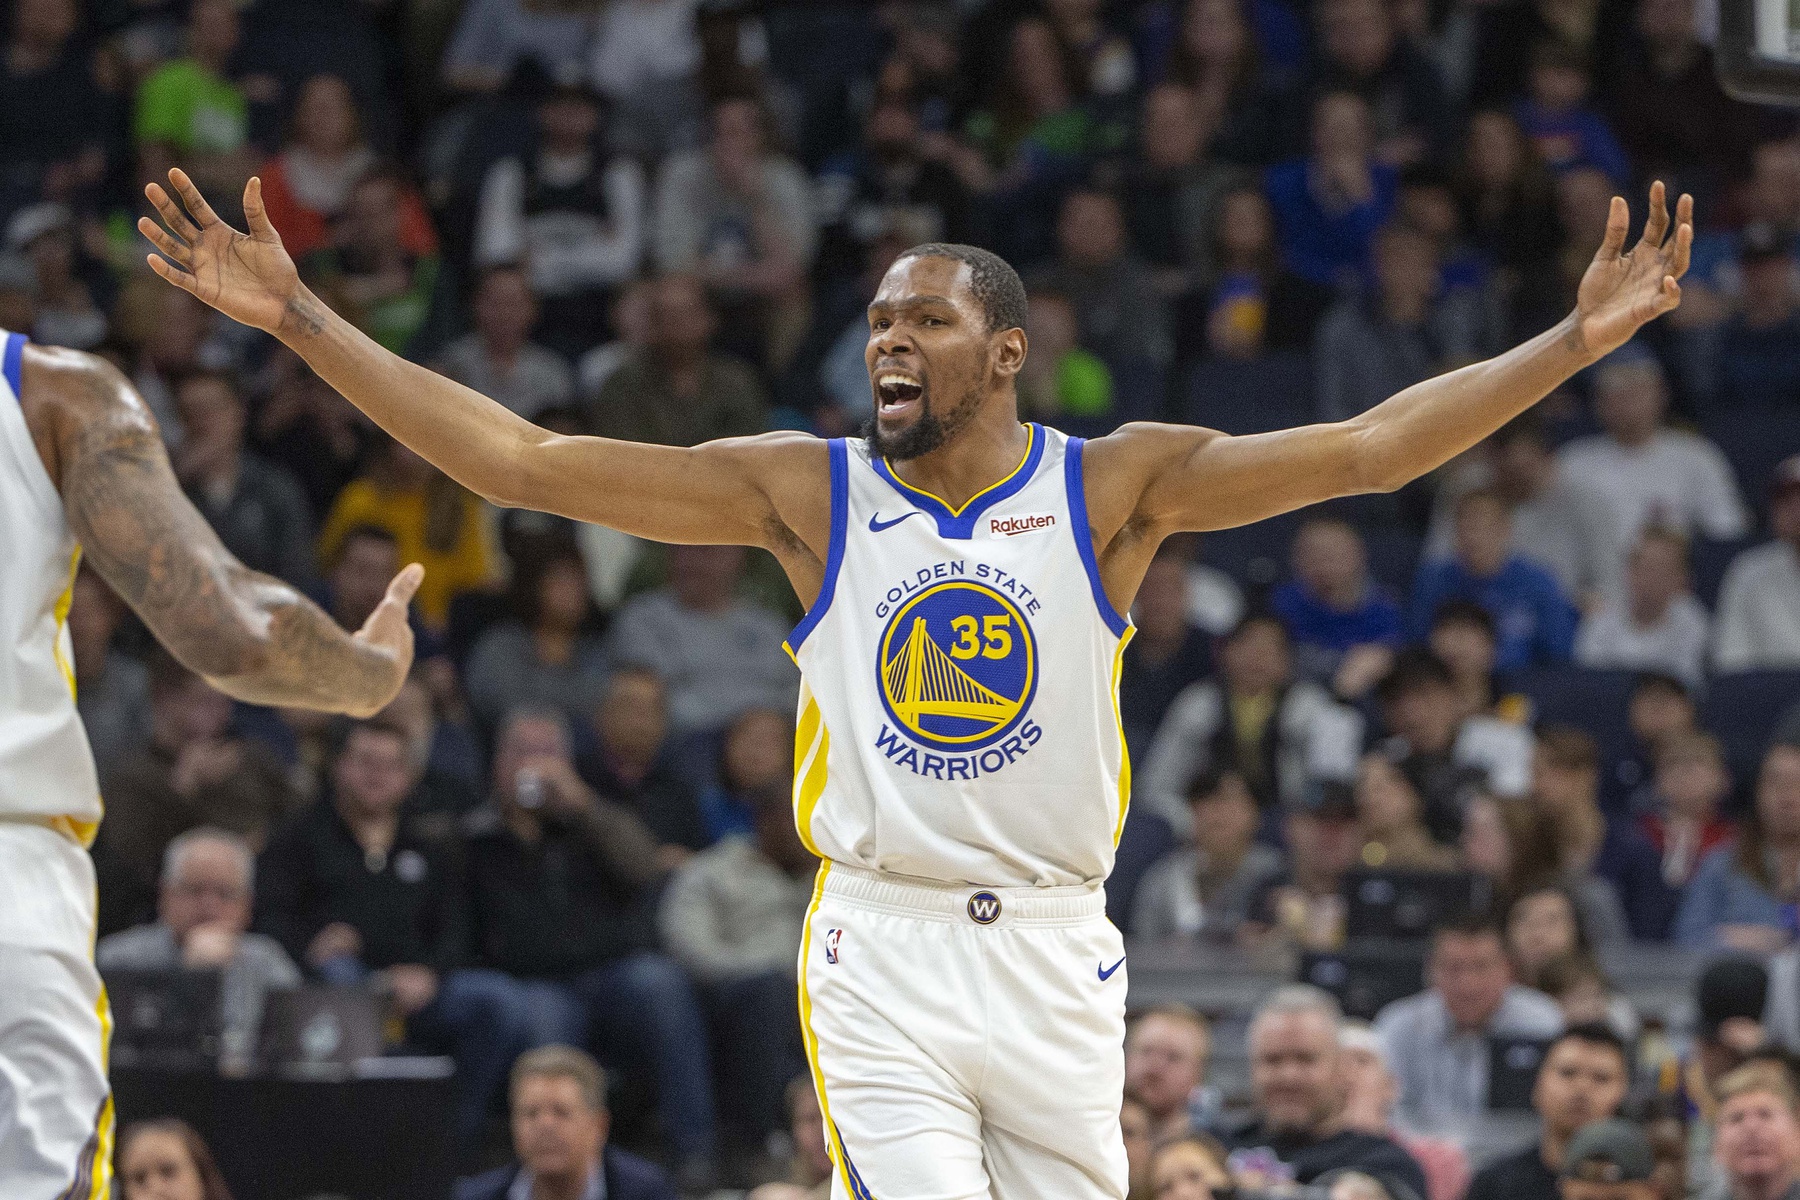 Golden State Warriors, Golden State Warriors, rumors, Kevin Durant, Kevin Durant trade rumors, Stephen Curry